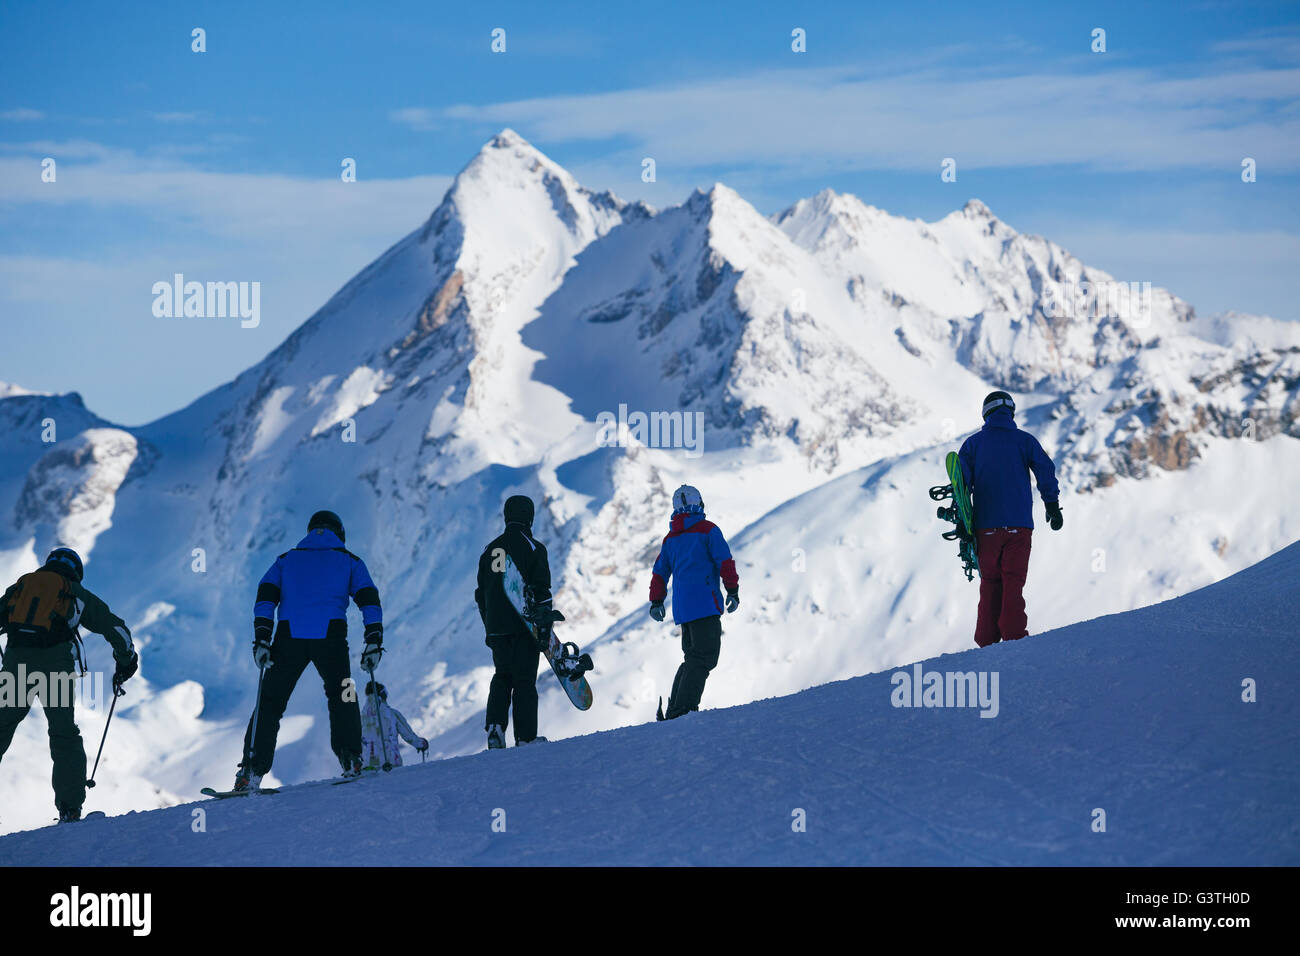 France, Rhône-Alpes, Savoie, Val D'Isere, People skiing and snowboarding in mountains Stock Photo